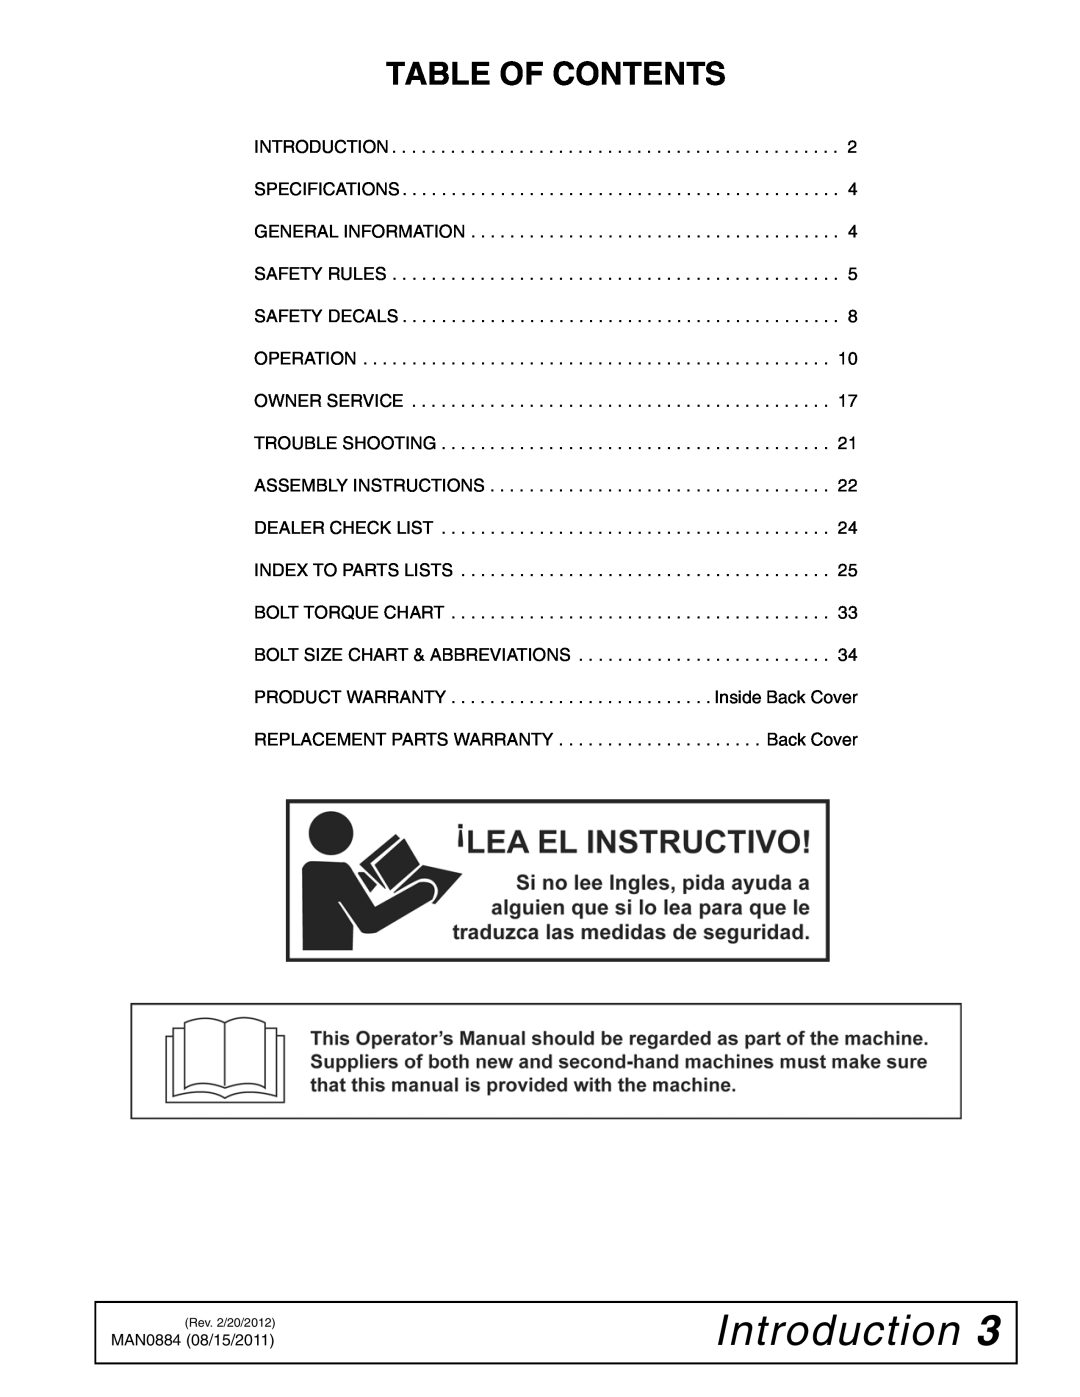 Woods Equipment SS84-2, SS96-2, SS108-2 manual Introduction, Table Of Contents 